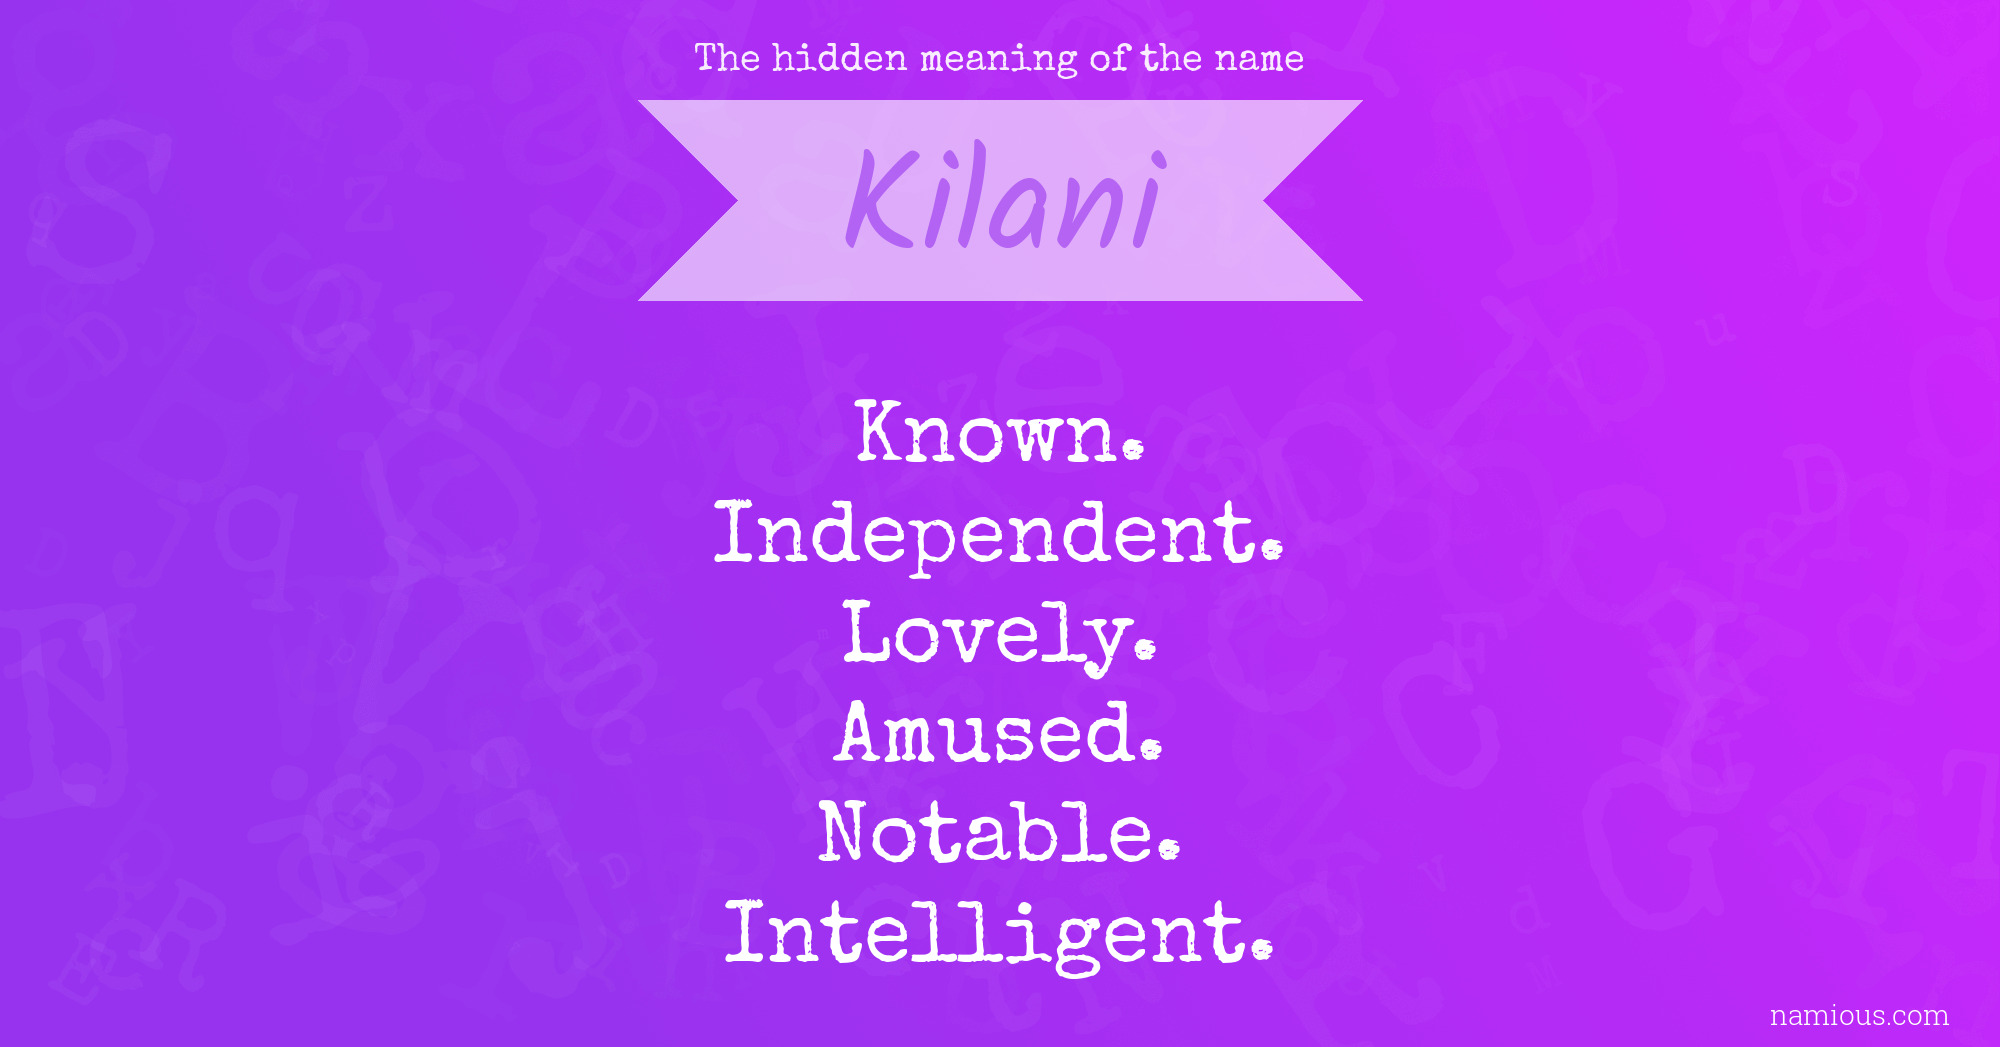 The hidden meaning of the name Kilani